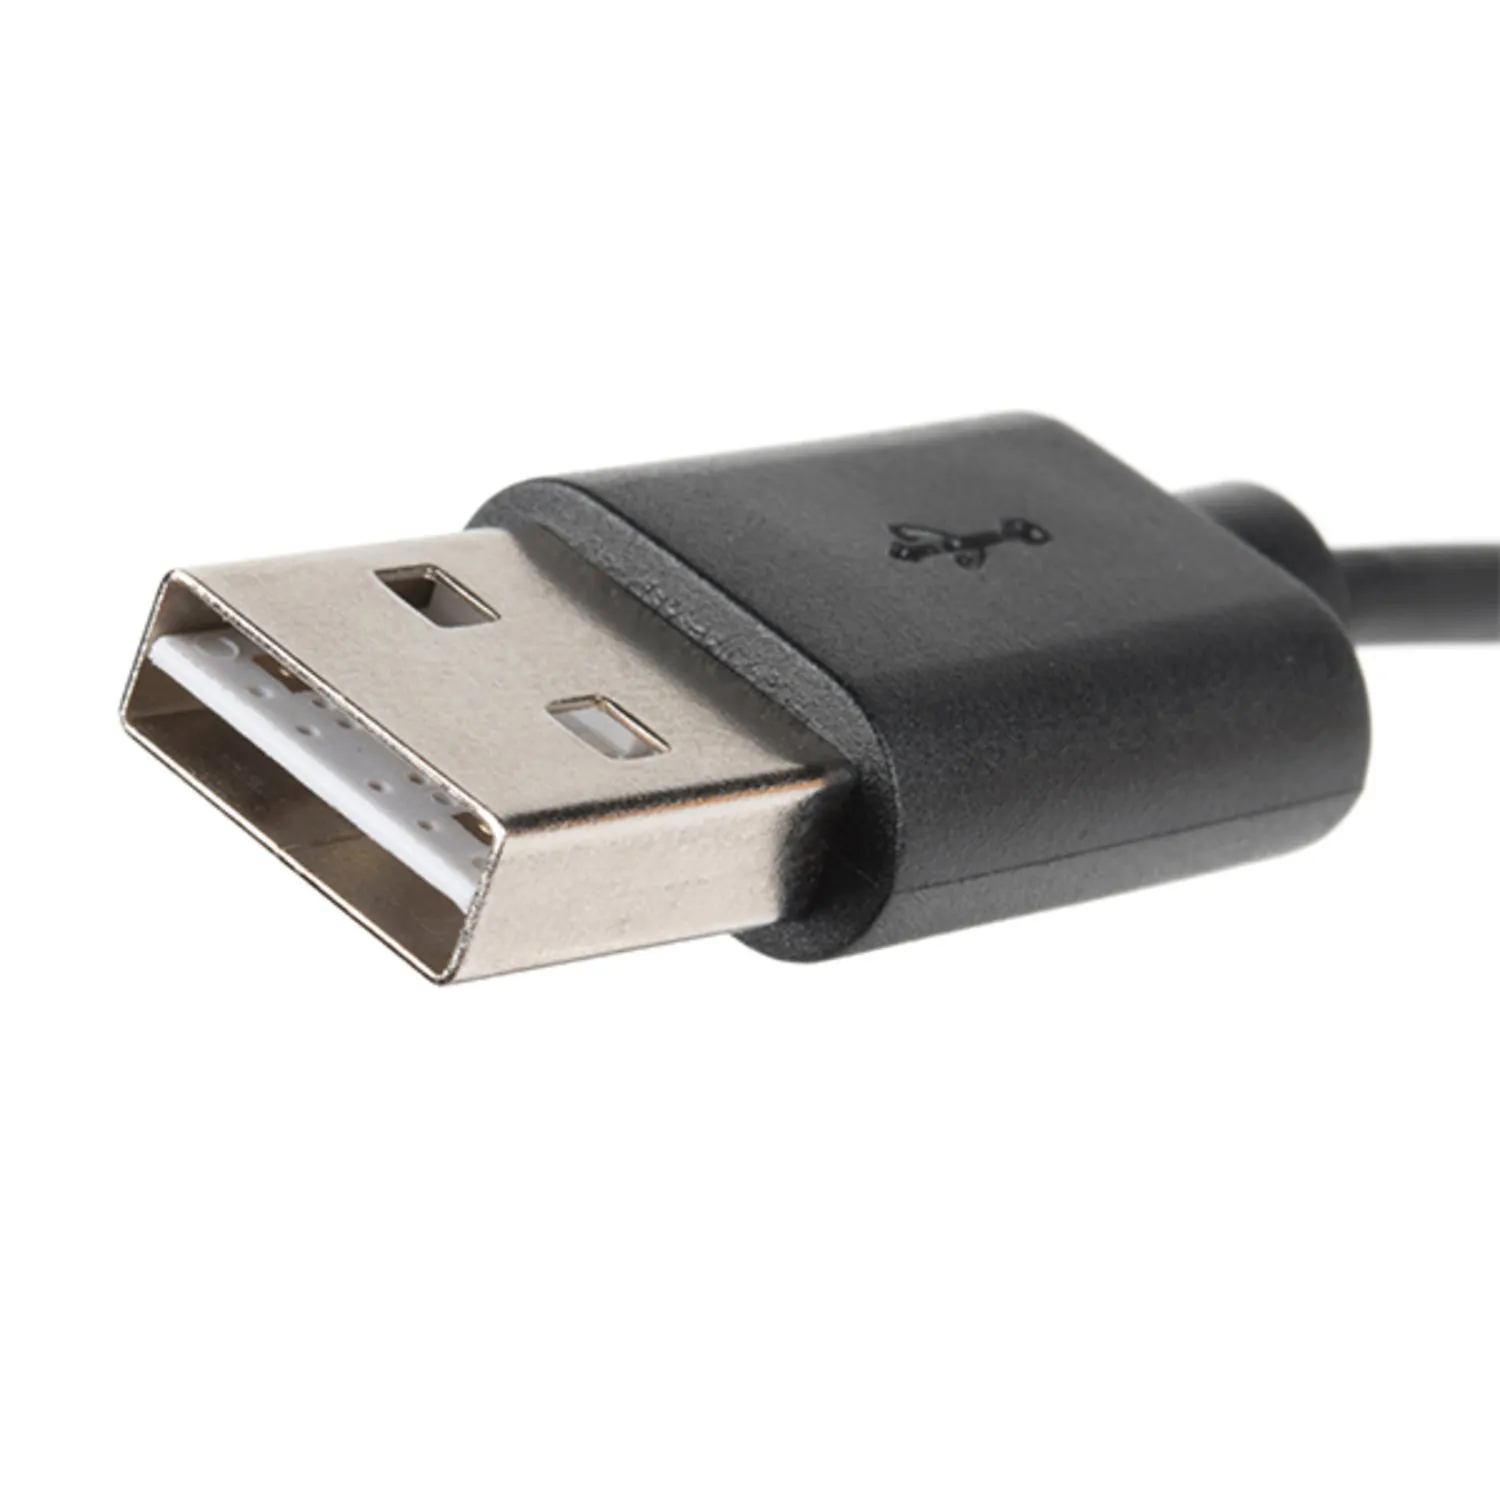 Photo of Reversible USB A to C Cable - 0.3m